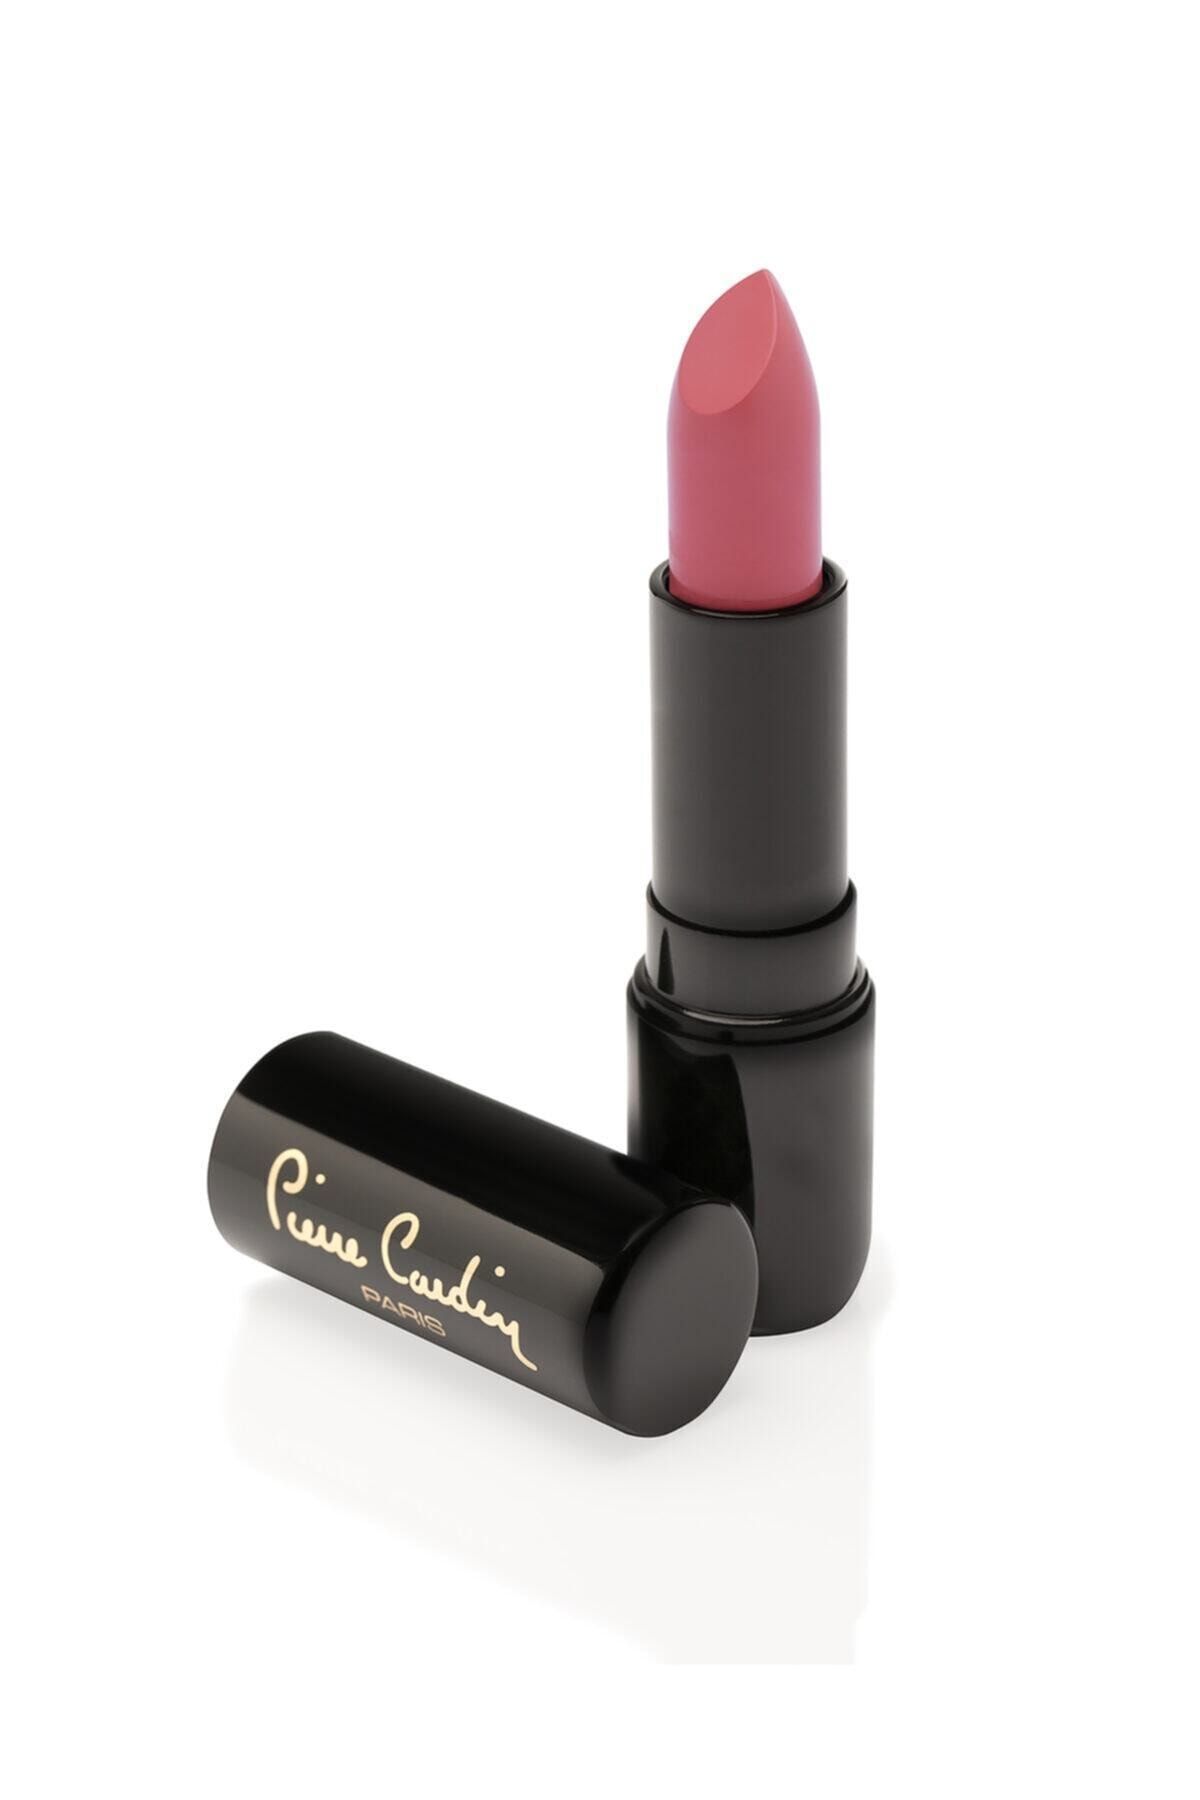 Pierre Cardin Porcelain Edition Lipstick - Naked Coral -223